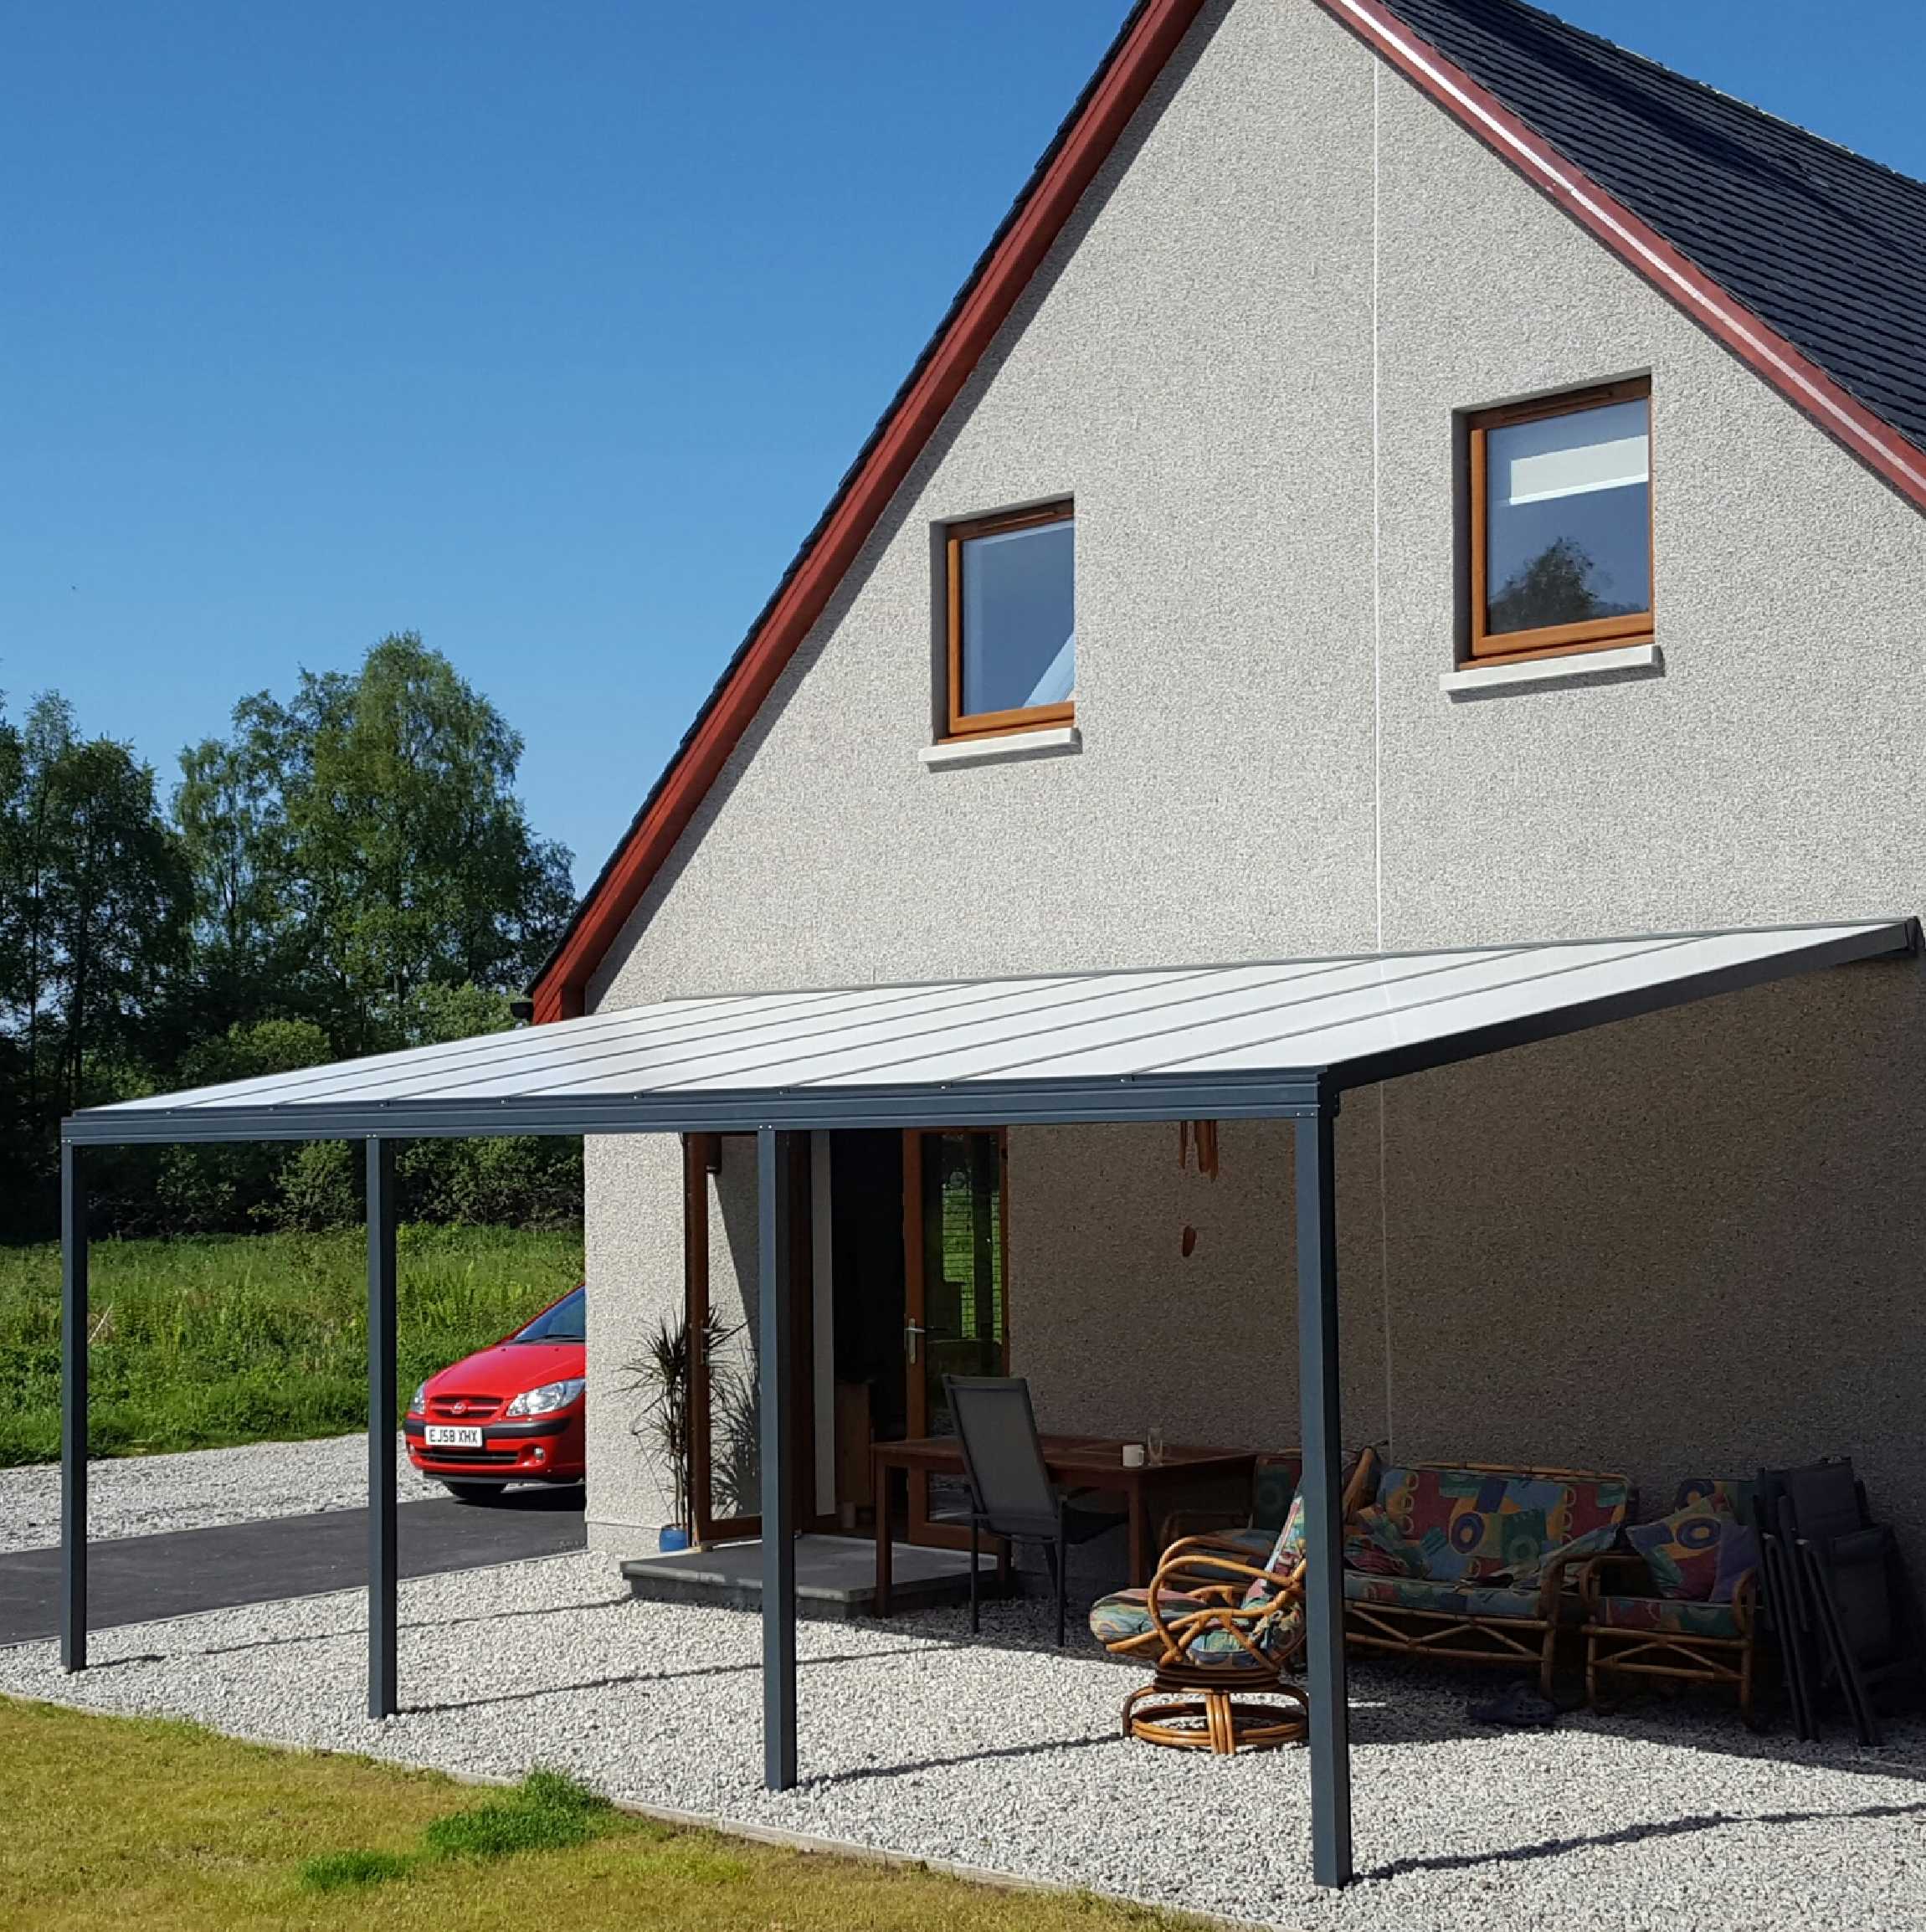 Great selection of Omega Smart Lean-To Canopy, Anthracite Grey, 16mm Polycarbonate Glazing - 11.6m (W) x 2.0m (P), (5) Supporting Posts